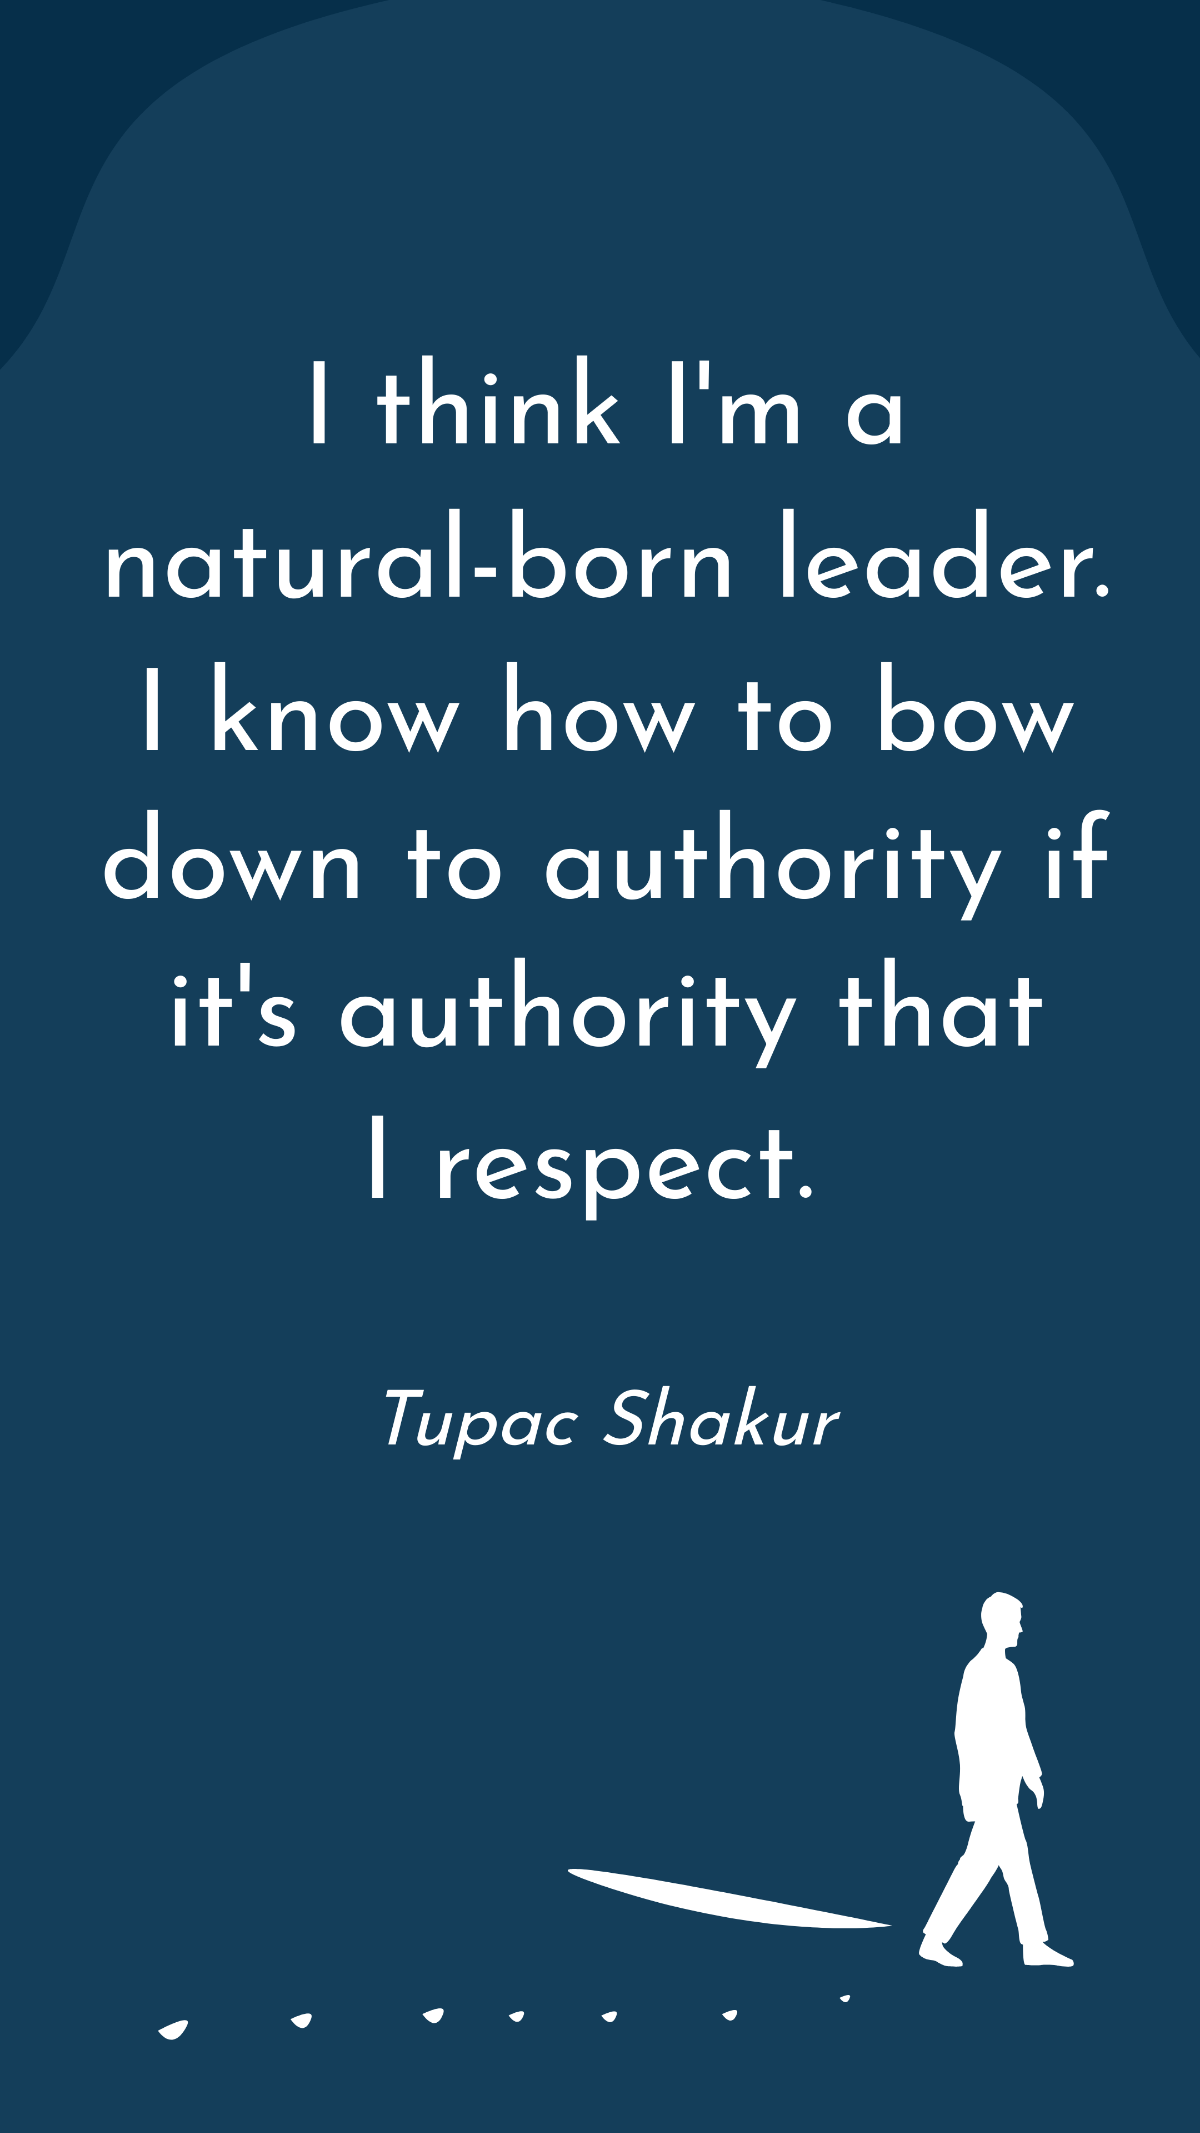 Tupac Shakur - I think I'm a natural-born leader. I know how to bow down to authority if it's authority that I respect. Template